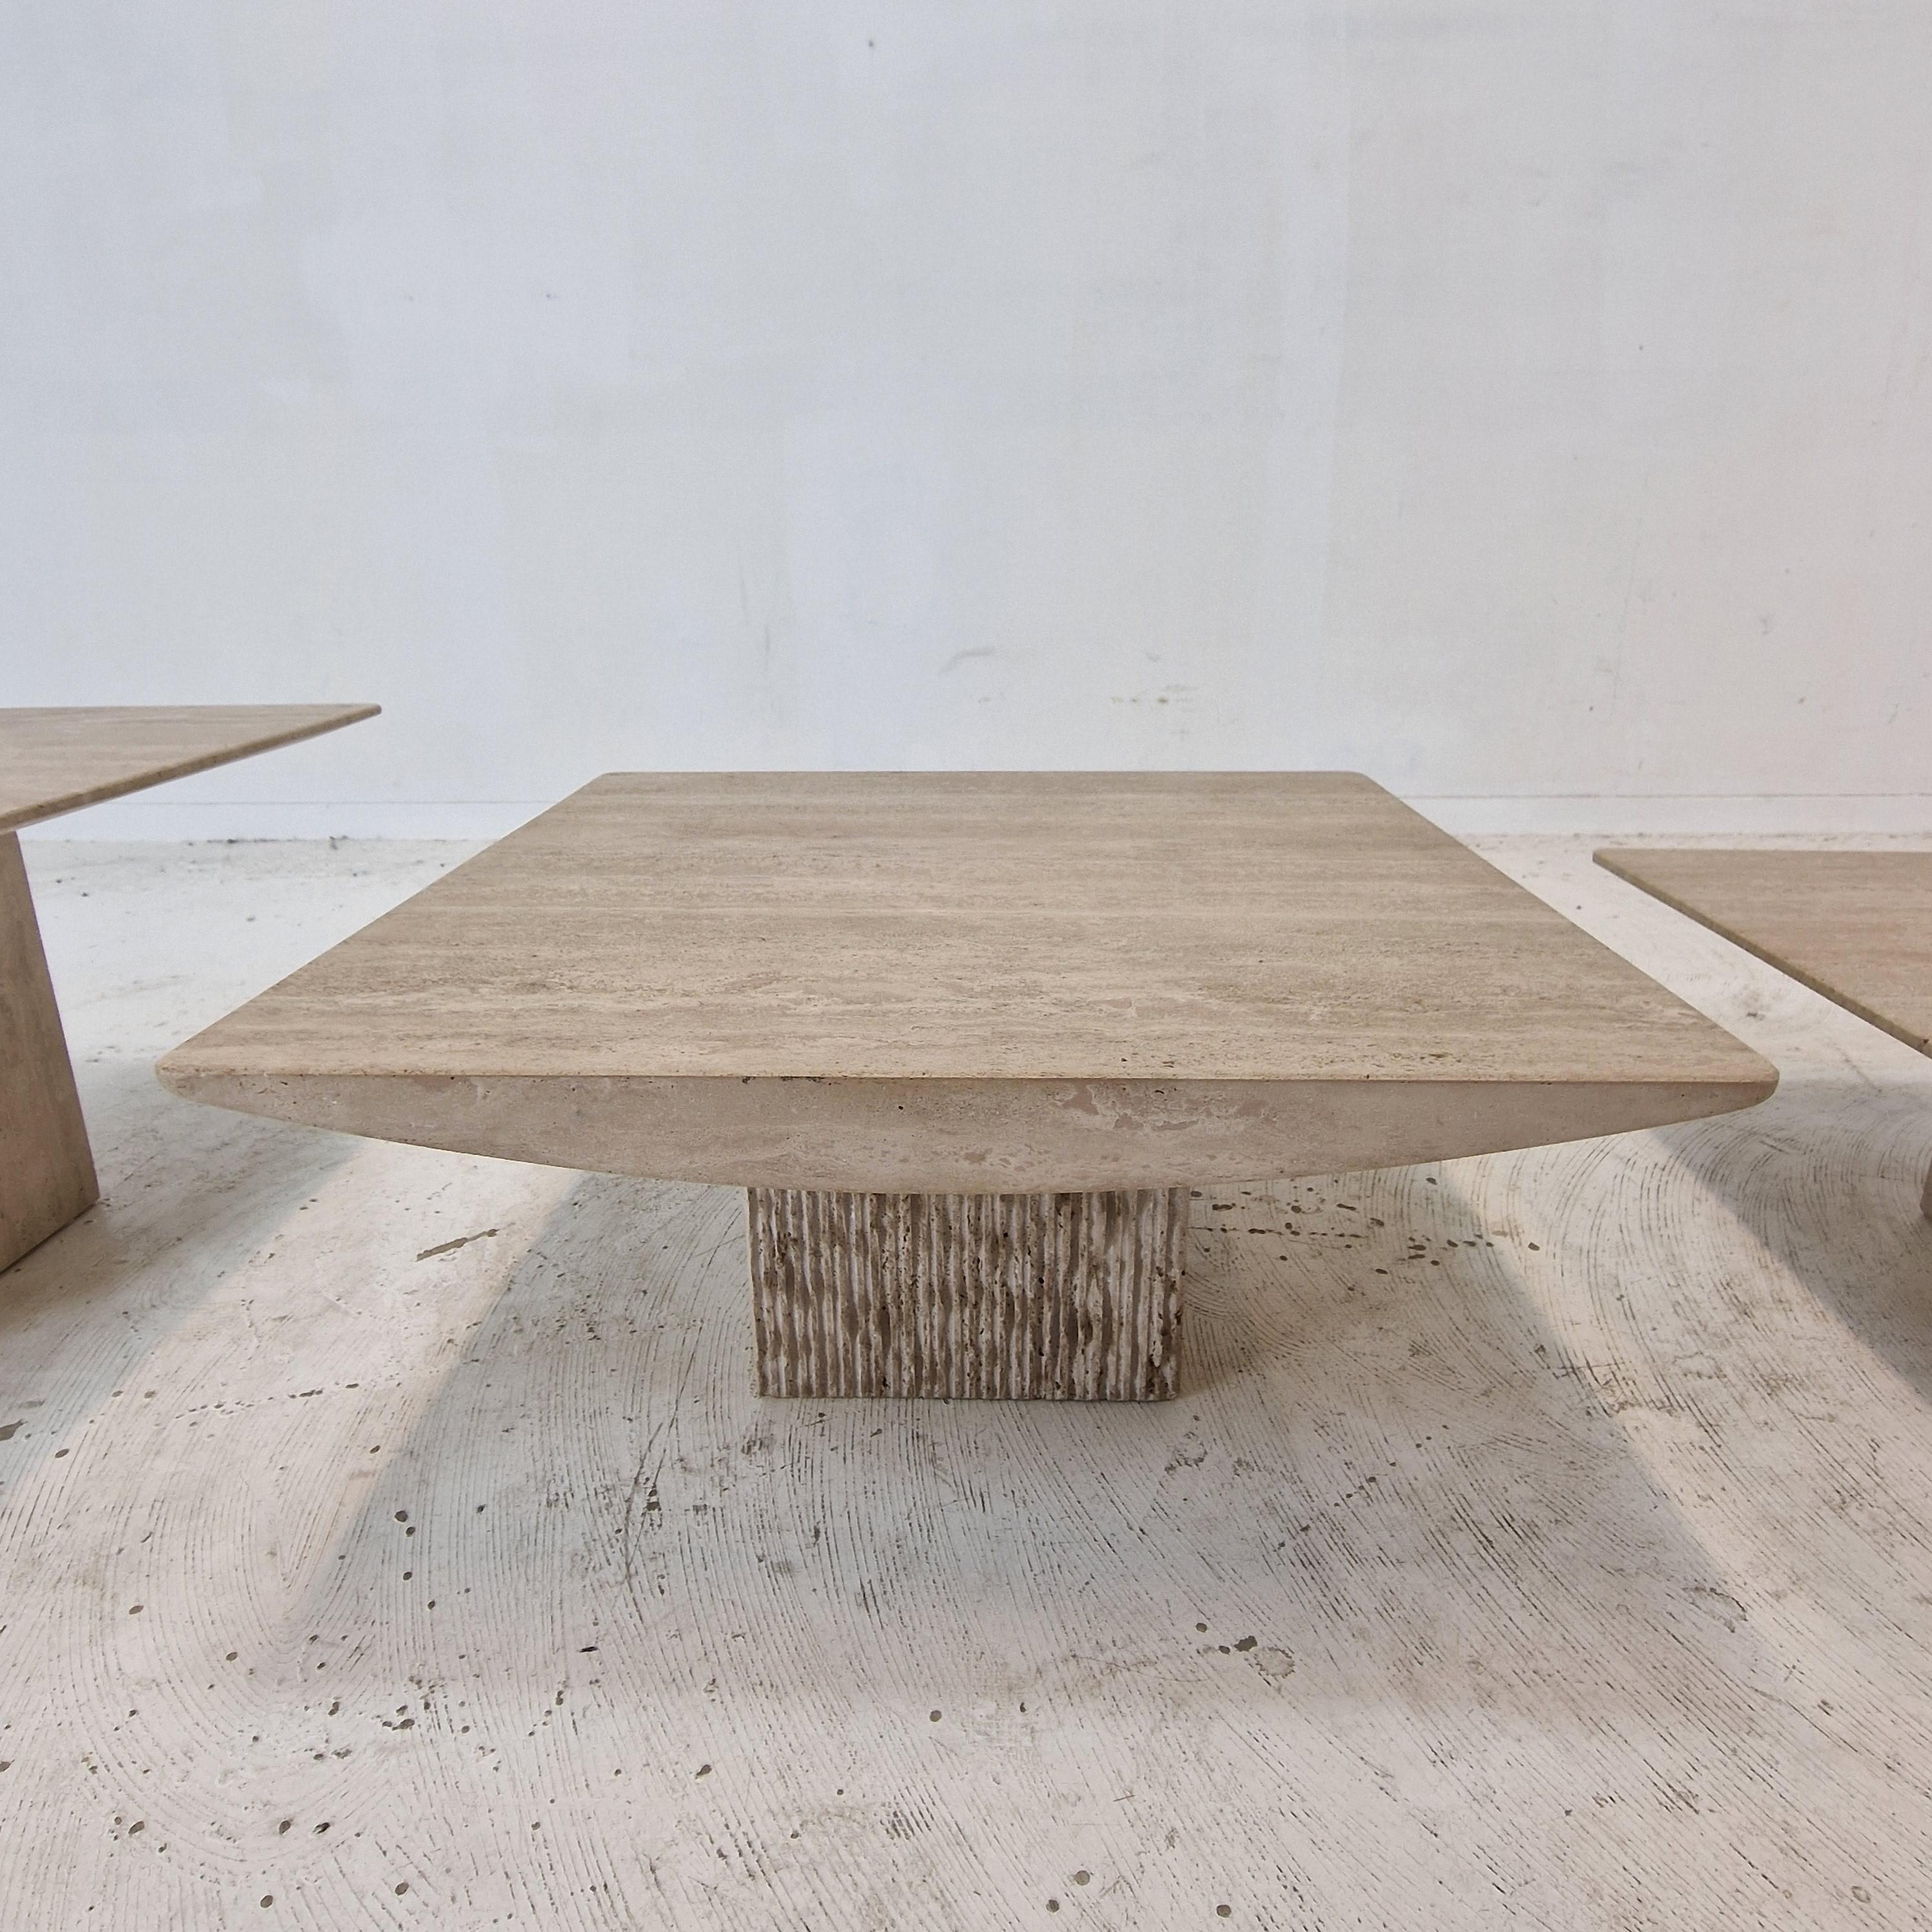 Set of 3 Italian Travertine Coffee or Side Tables, 1980s For Sale 4